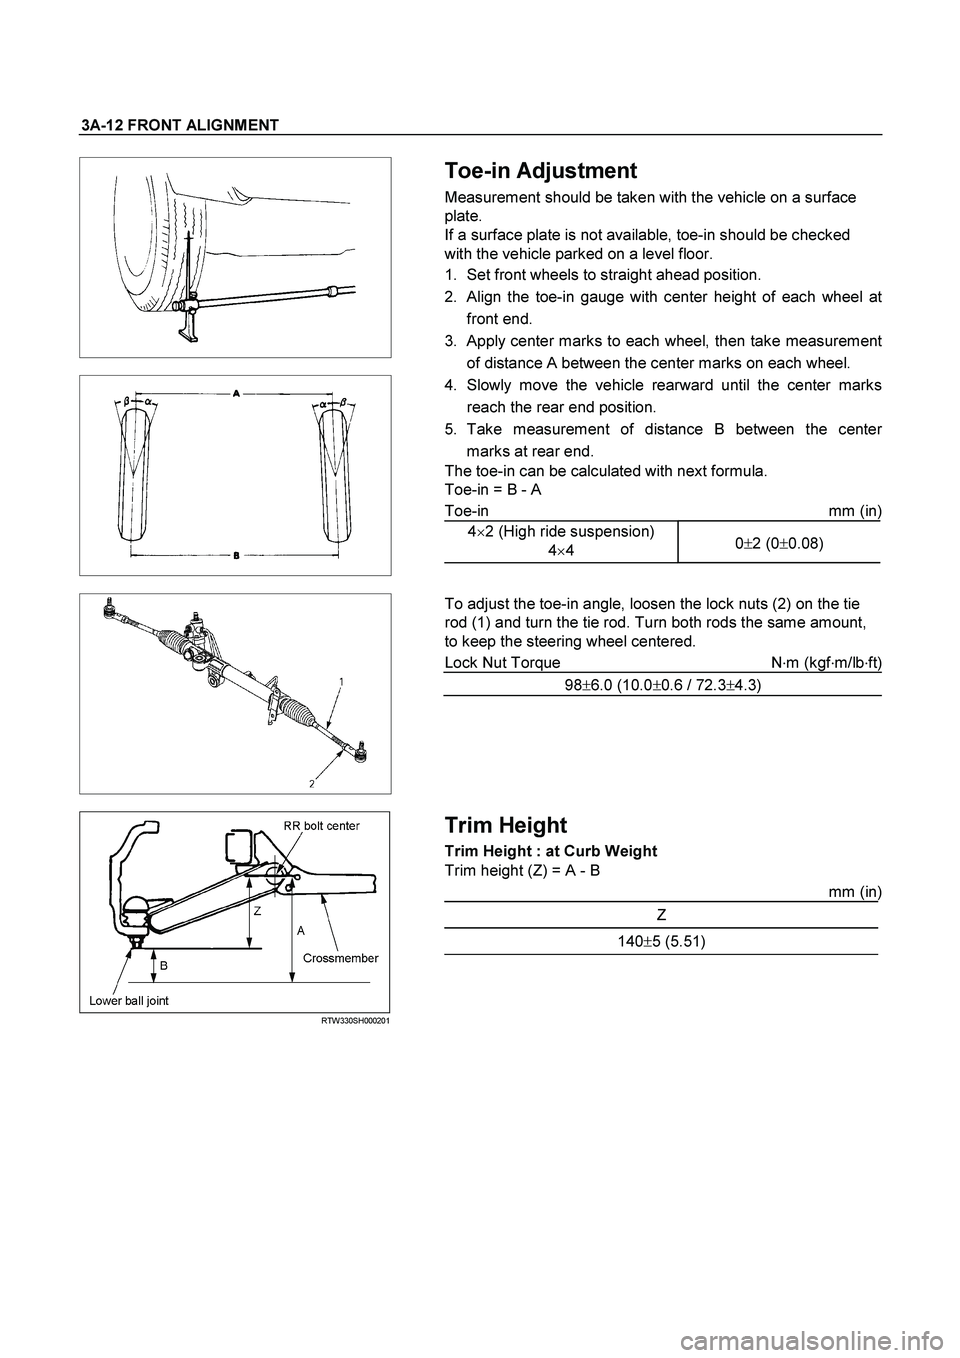 ISUZU TF SERIES 2004  Workshop Manual 3A-12 FRONT ALIGNMENT 
 
   
 
   
 Toe-in Adjustment 
Measurement should be taken with the vehicle on a surface 
plate. 
If a surface plate is not available, toe-in should be checked 
with the vehicl